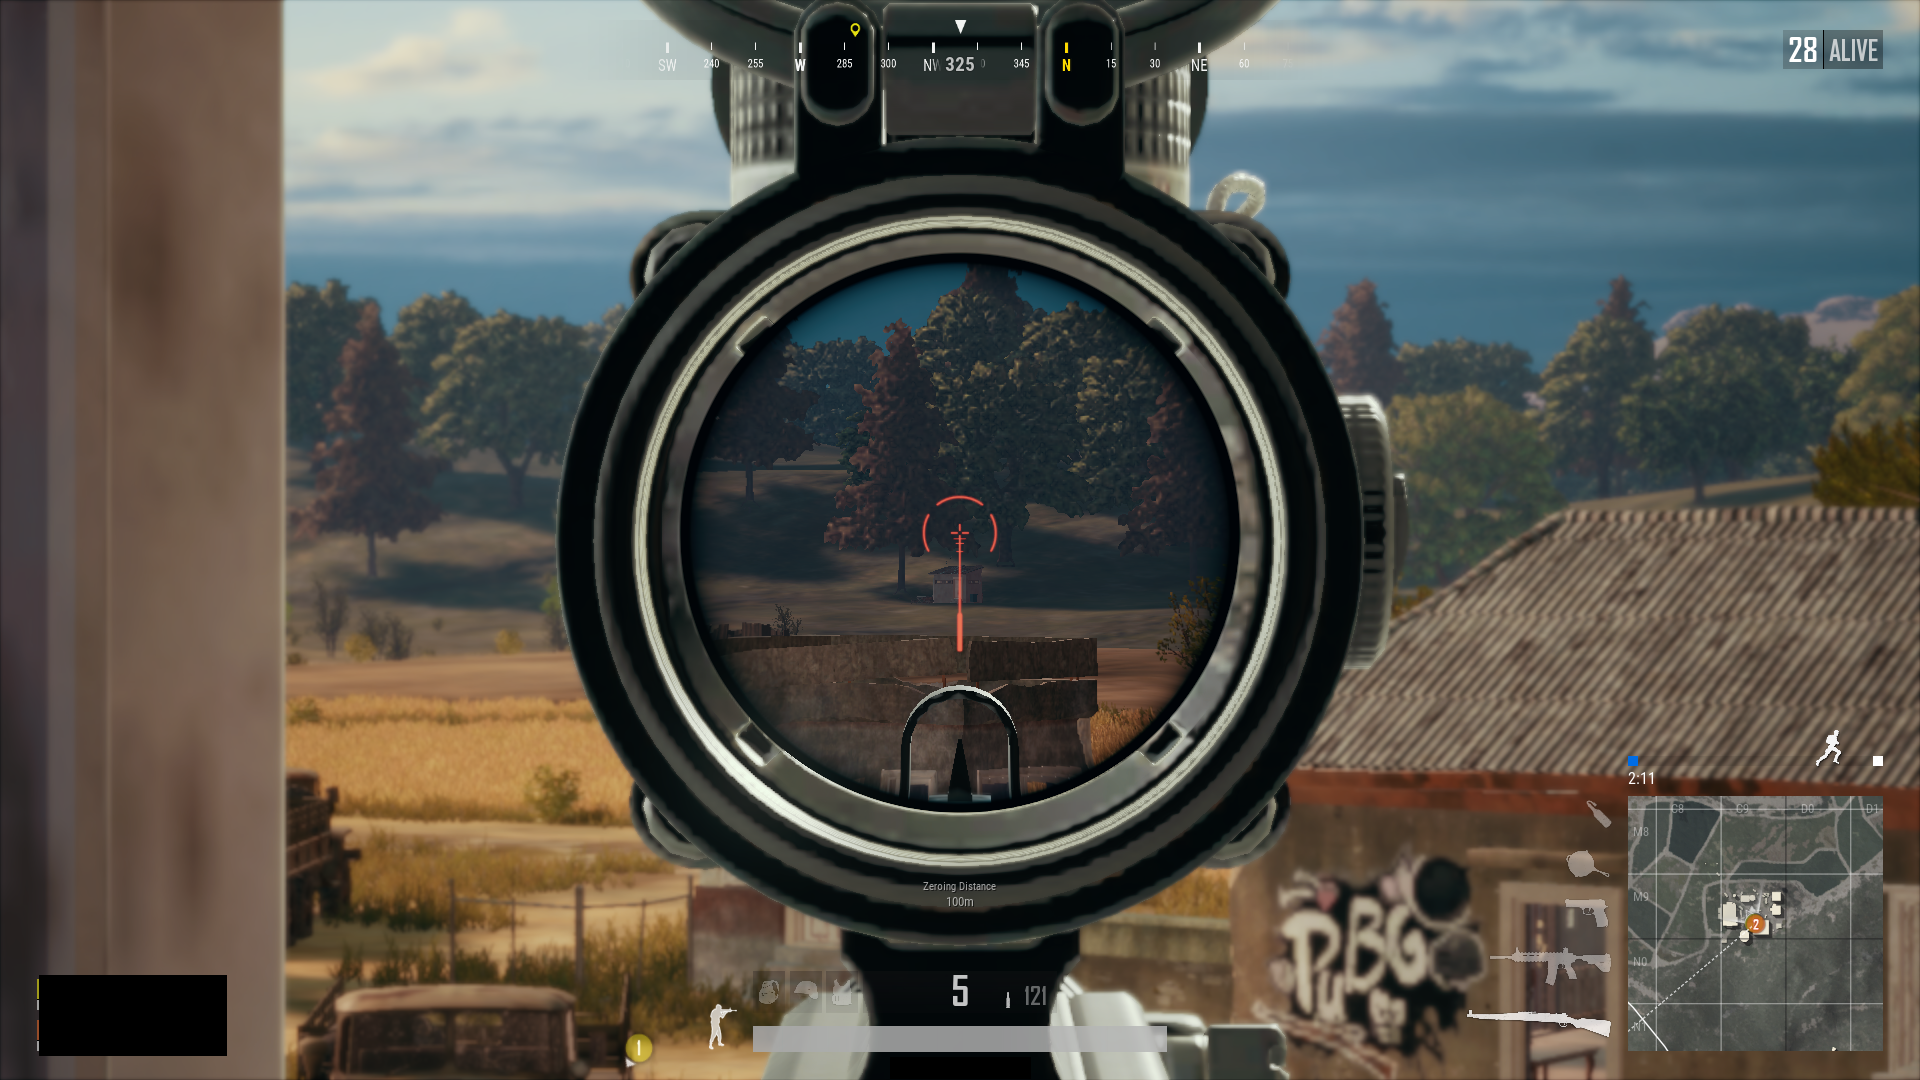 Why is 3x scope so dark? It makes hard to see people in dark areas